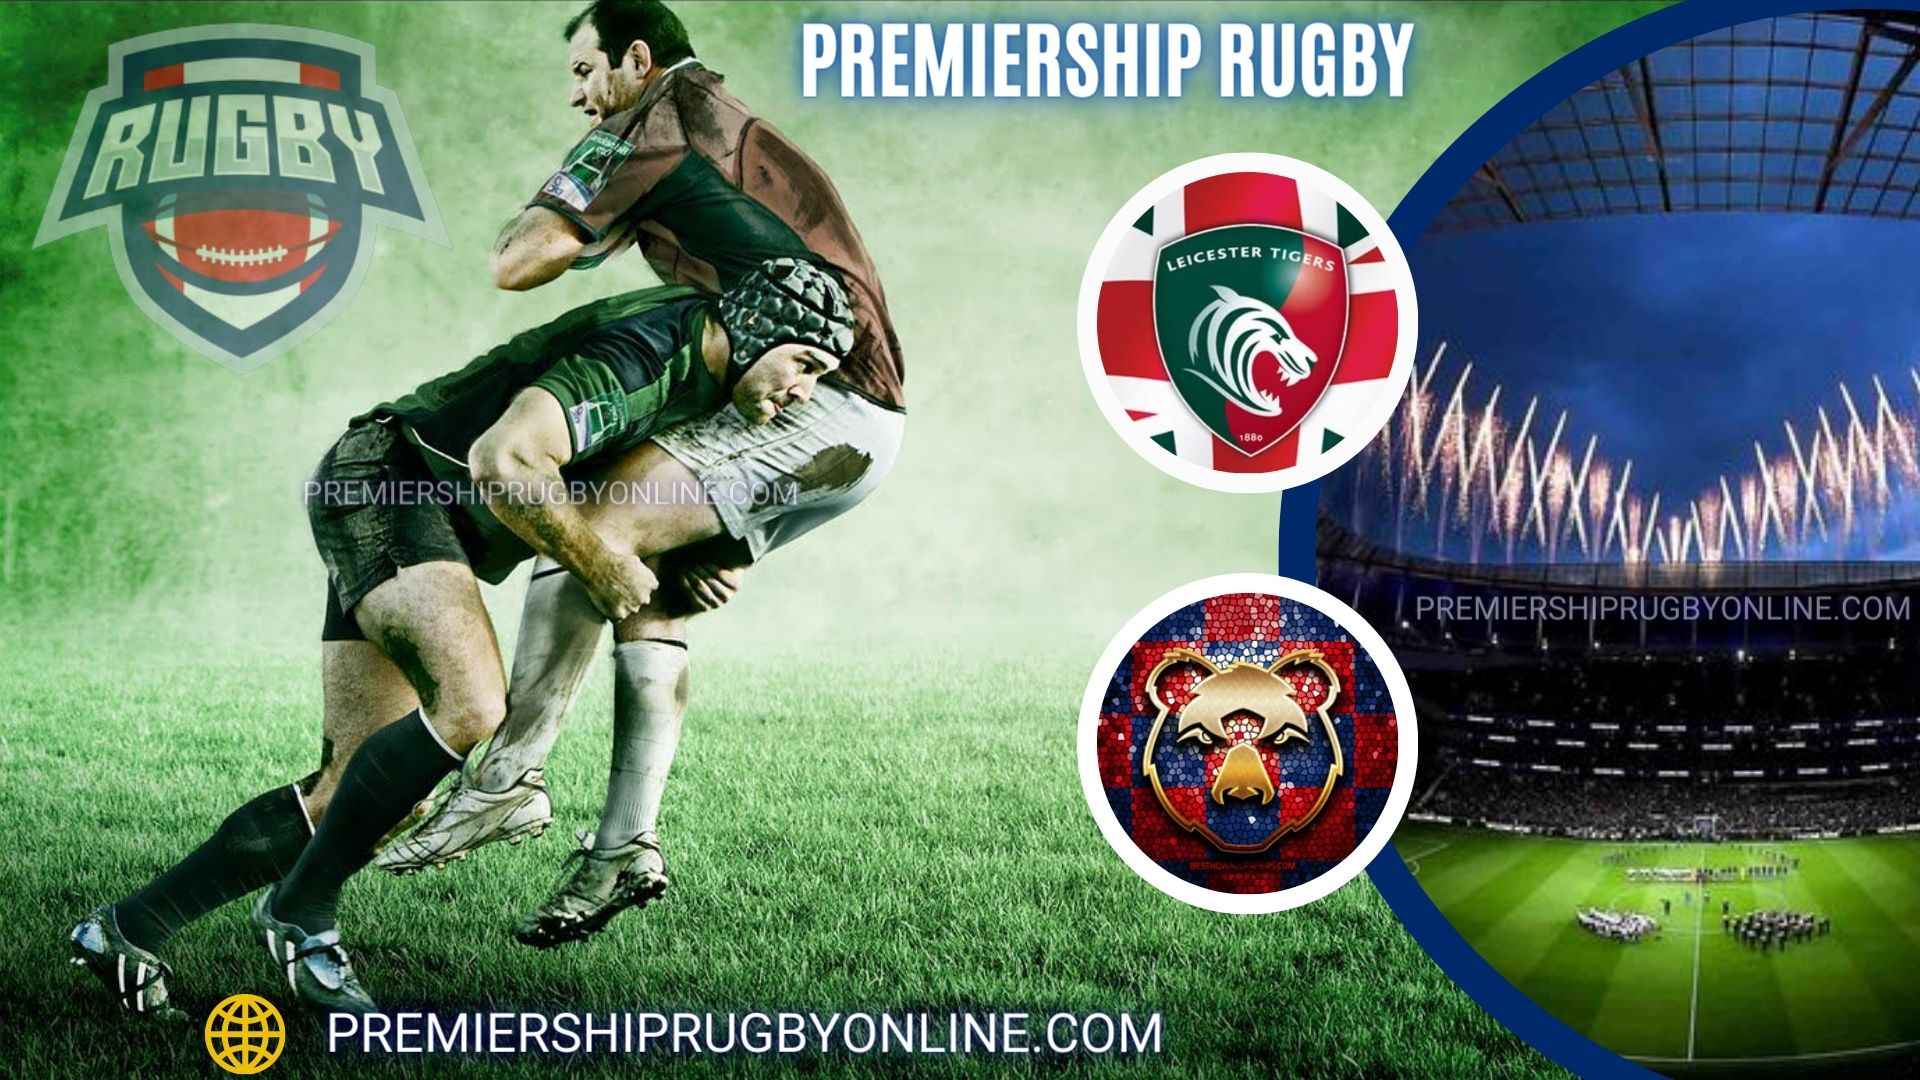 Leicester Tigers Vs Bristol Bears Live Stream 2022-23 | Premiership Rugby RD 21 slider